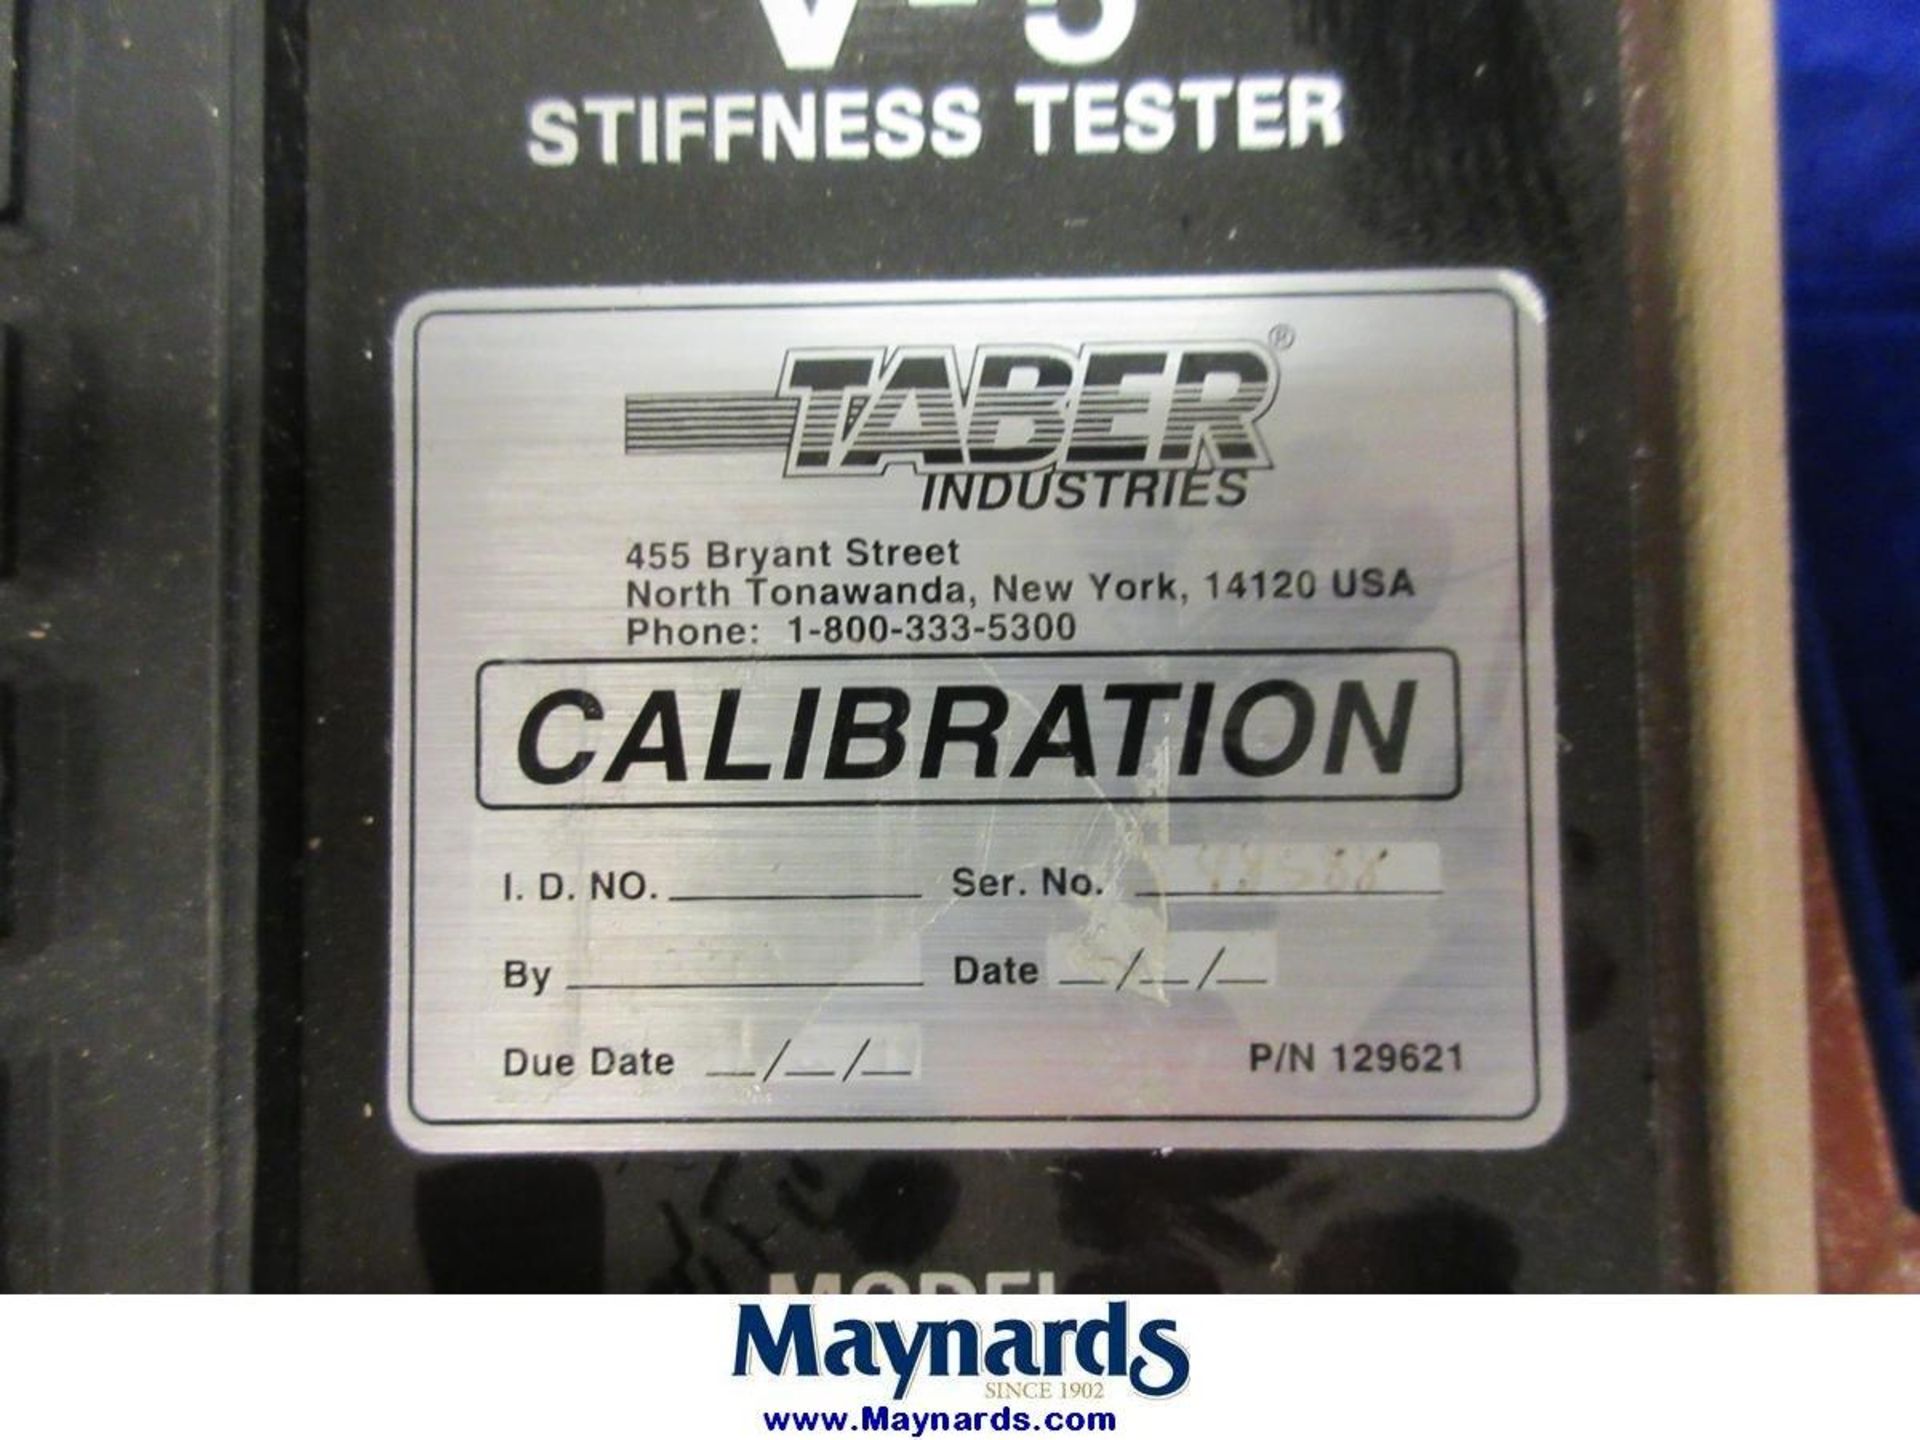 Taber Industries Model 150-E Stiffness Tester - Image 7 of 7